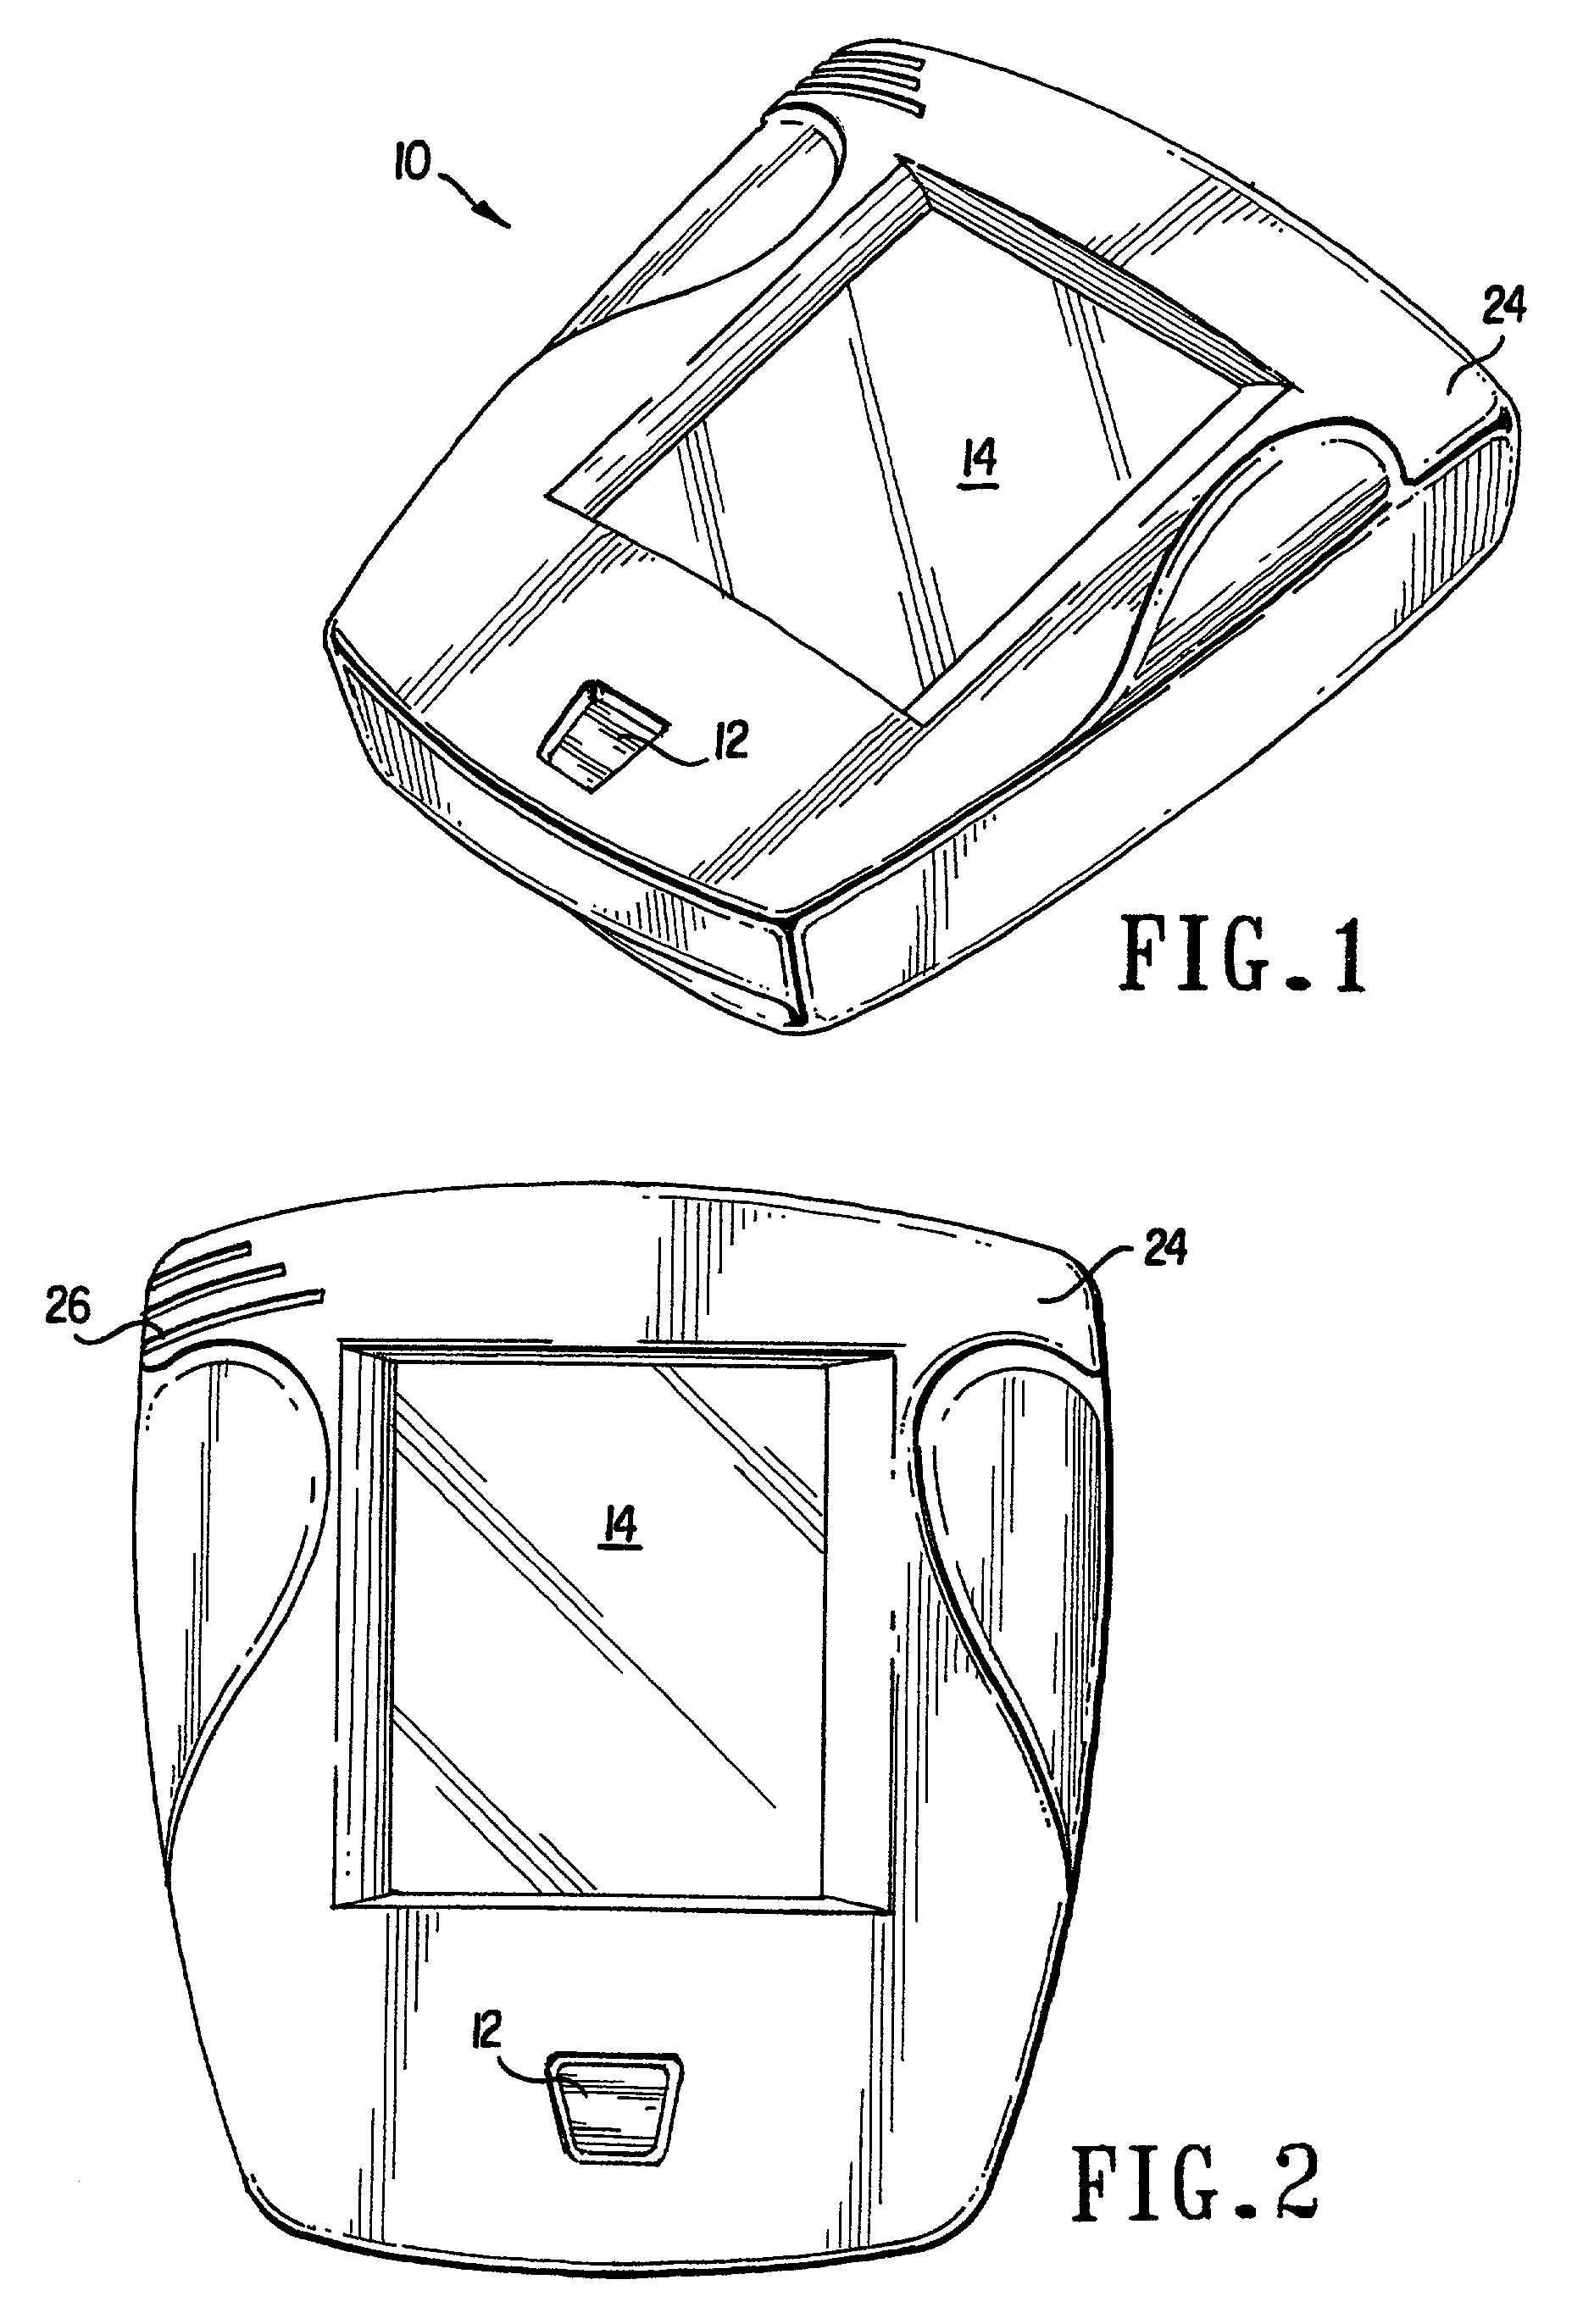 Multi-functional portable electro-medical device